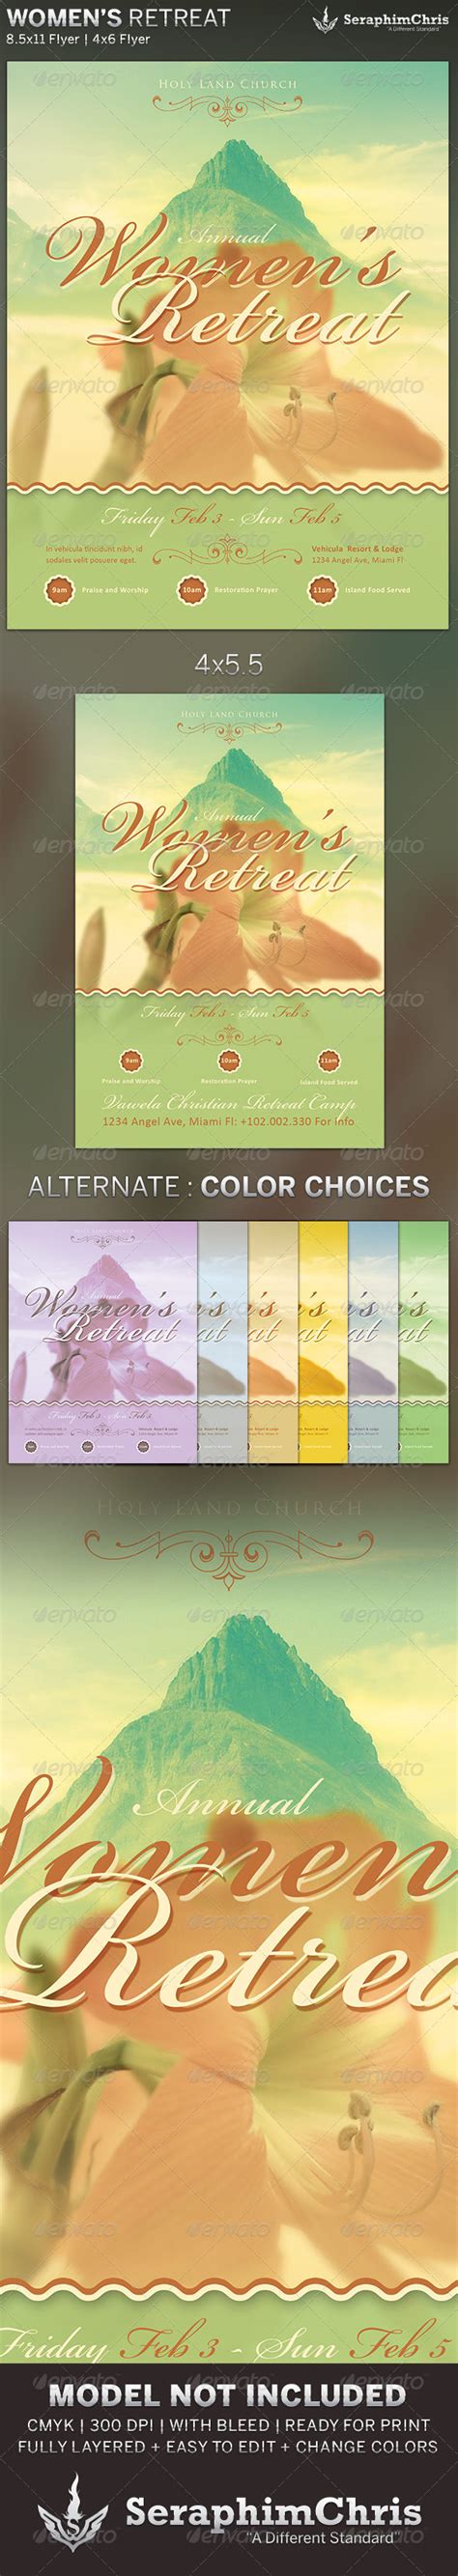 Womens Retreat Church Flyer Template By Seraphimchris Graphicriver